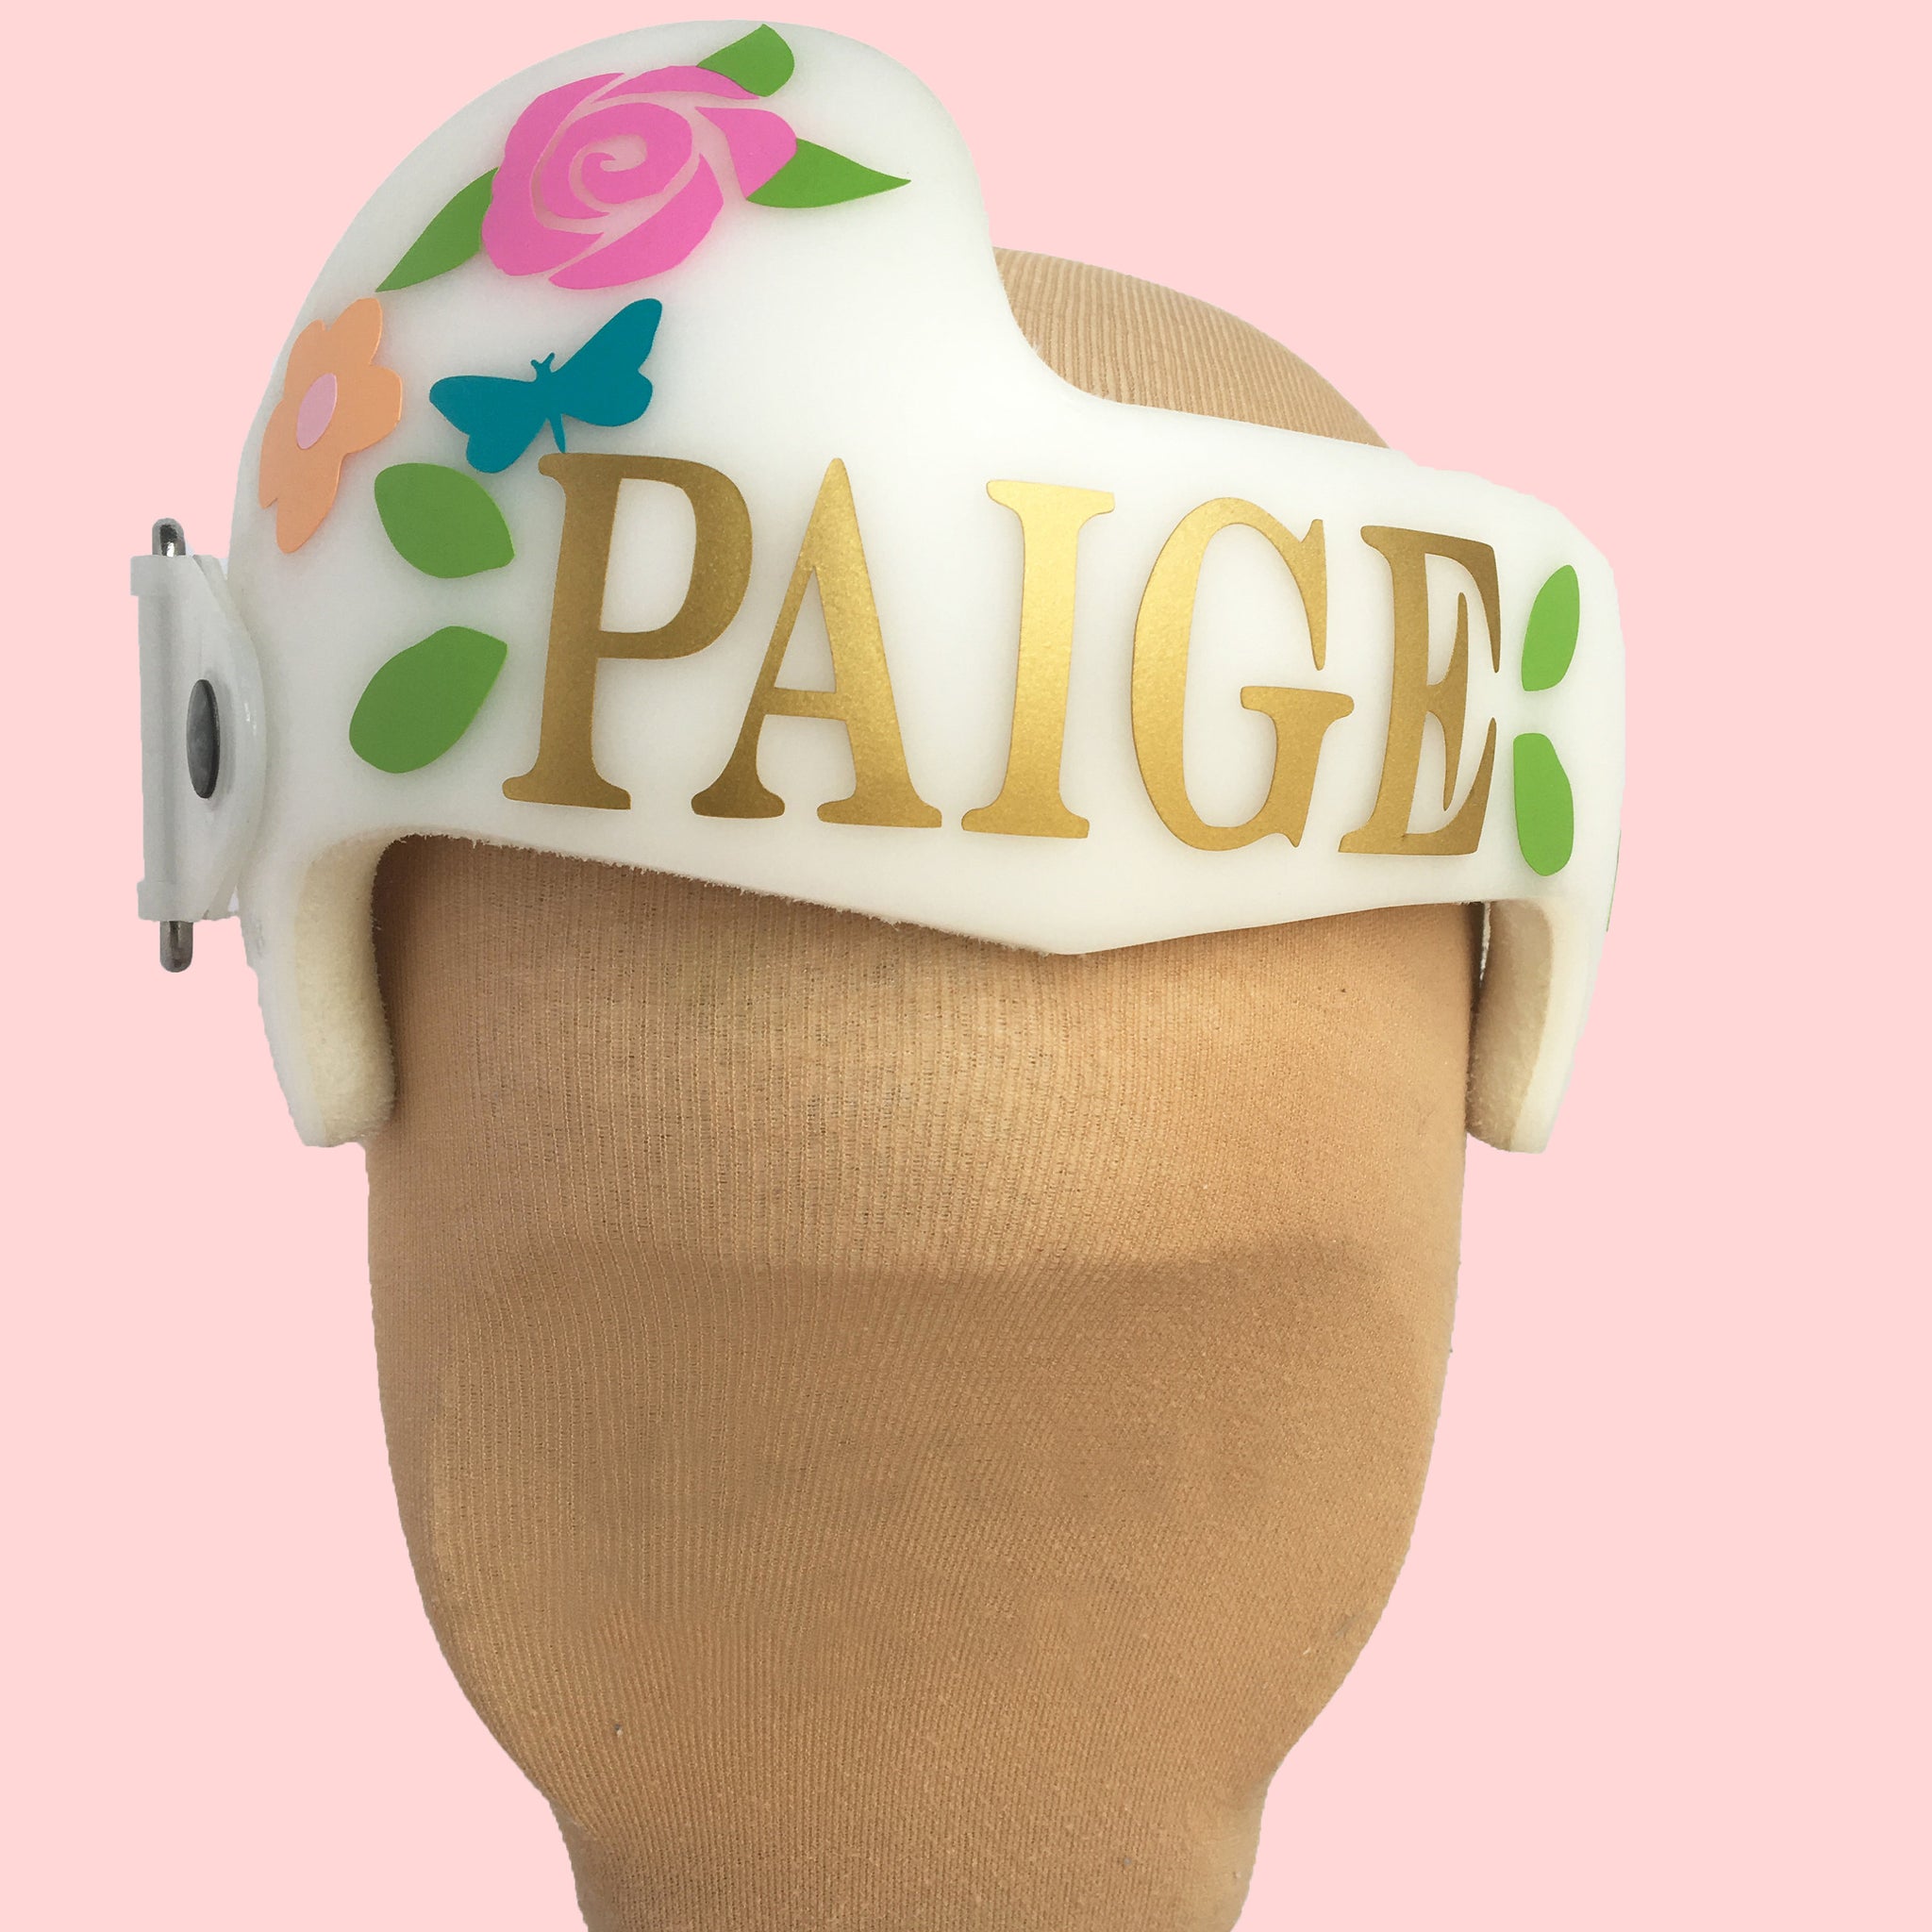 Floral Personalized Helmet decal - JS Typography Inc